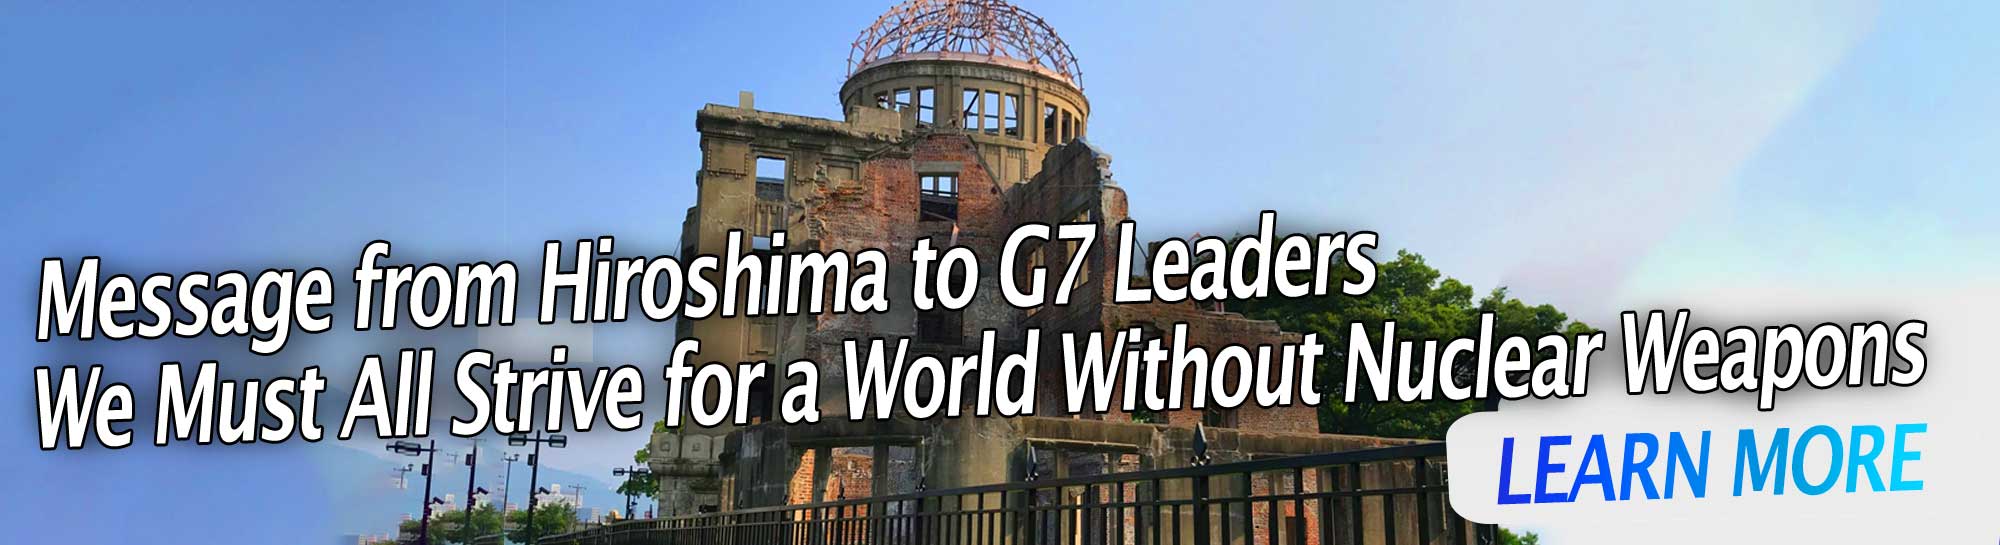 Message from Hiroshima to G7 Leaders: We Must All Strive for a World without Nuclear Weapons